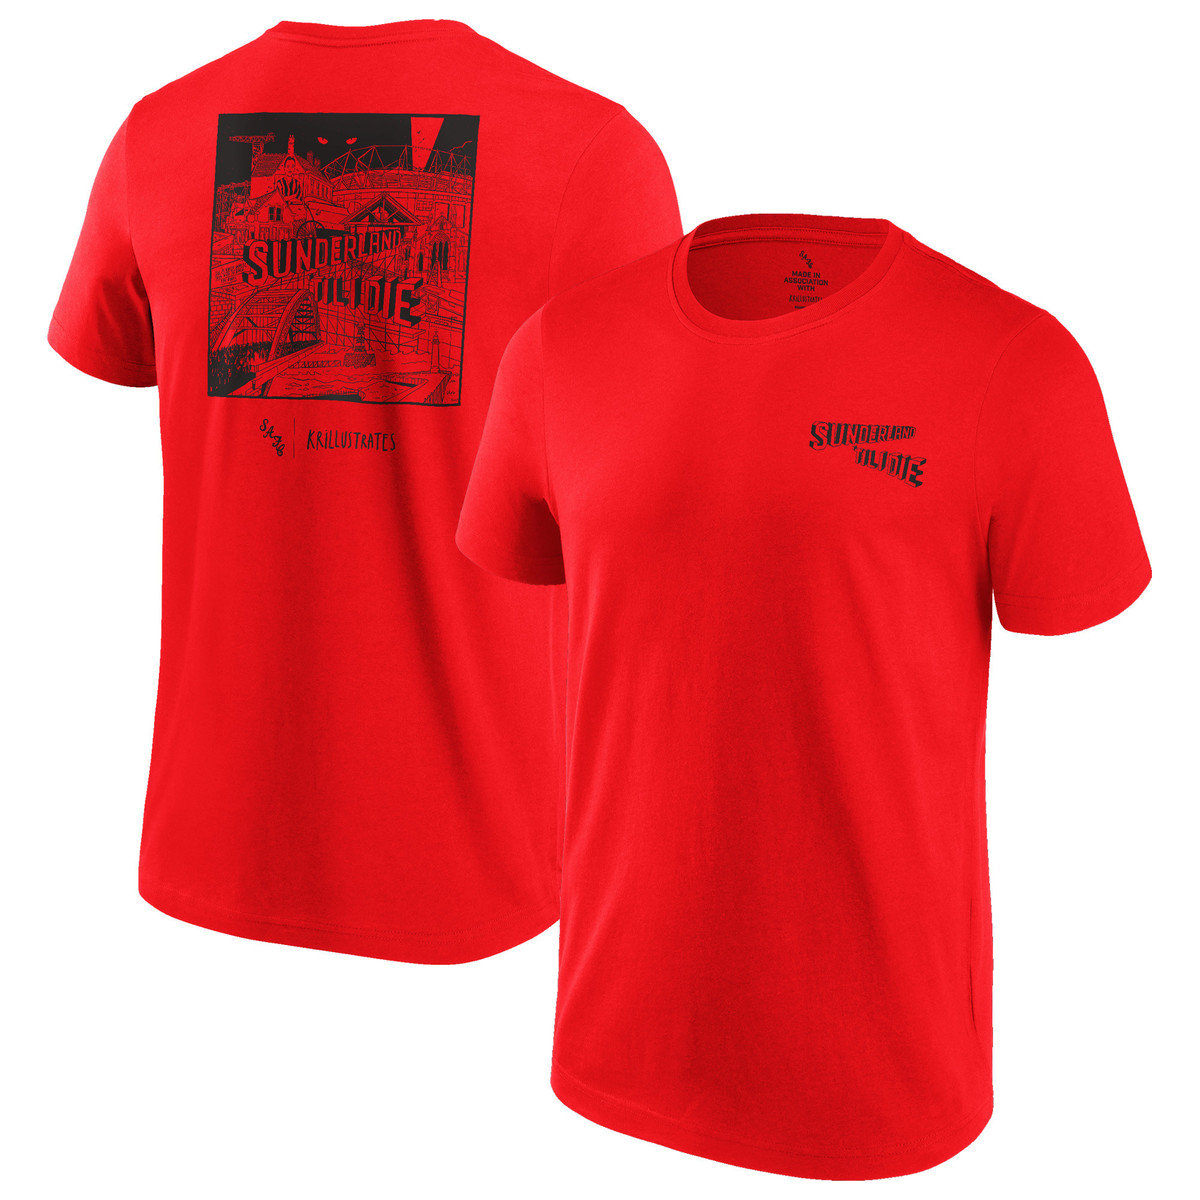 Buy the STID RED GRAPHIC TEE S online at Sunderland AFC Store